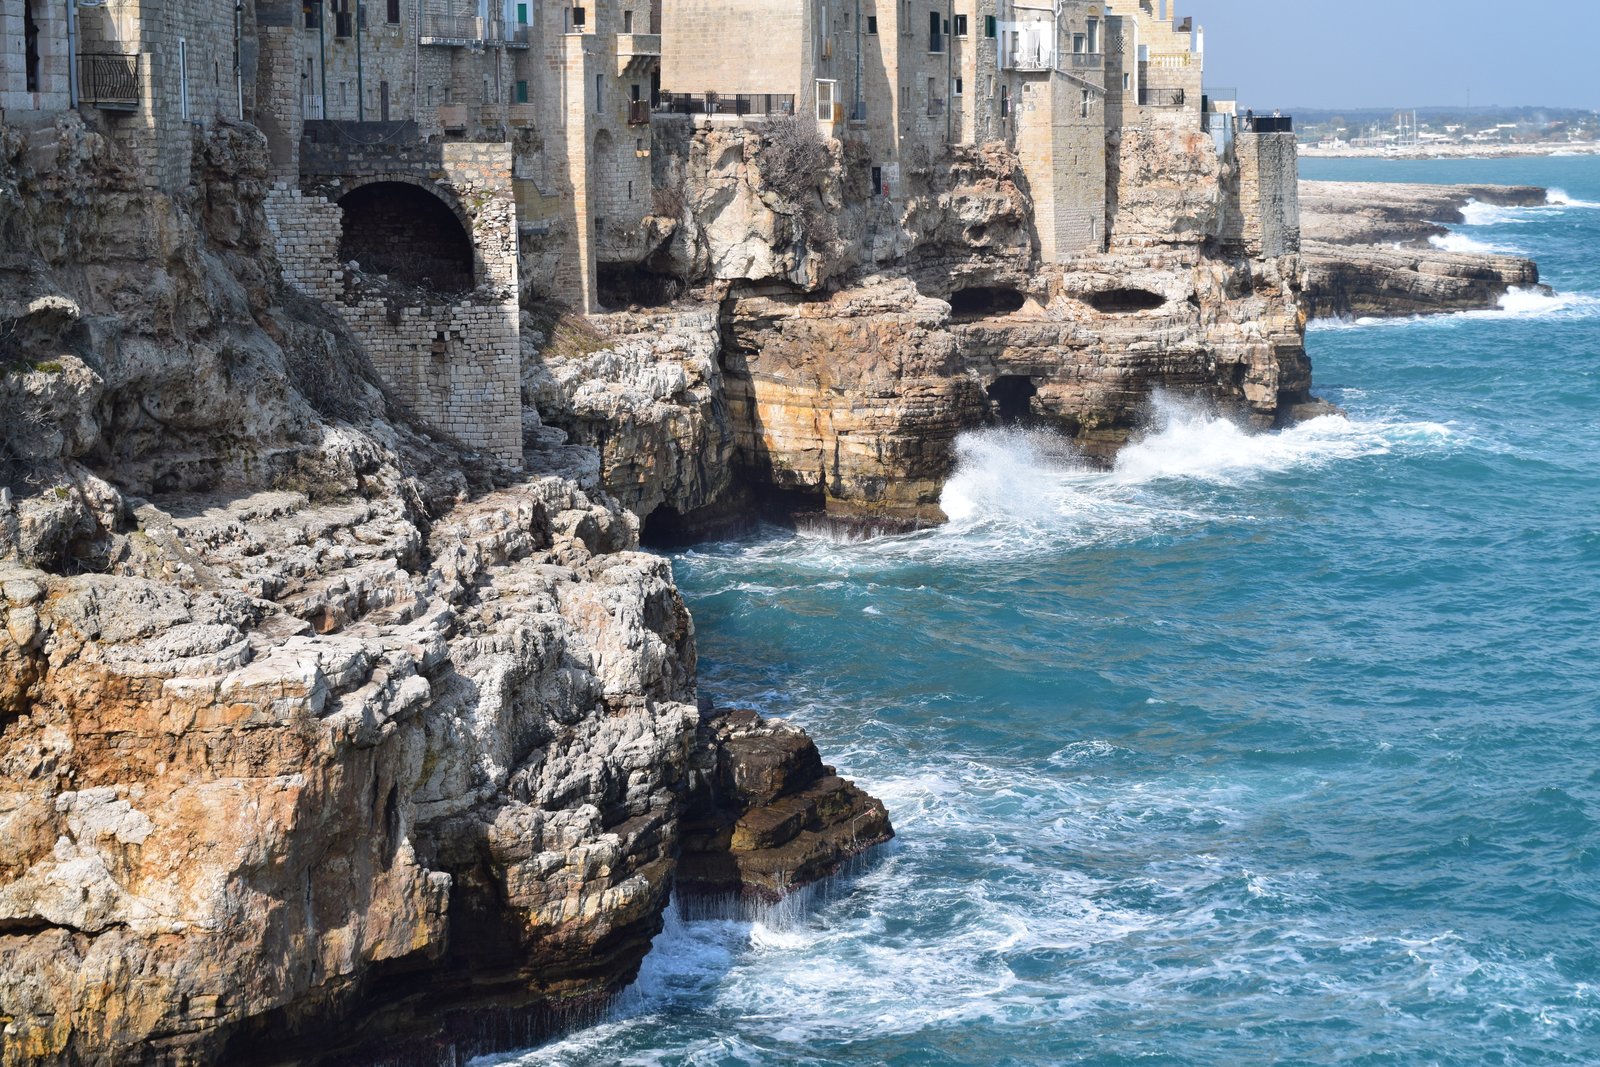 Polignano a Mare is a beautiful town with turquoise waters and amazing cliffs and caves. Located in Puglia, Italy, ouritalianjourney.com